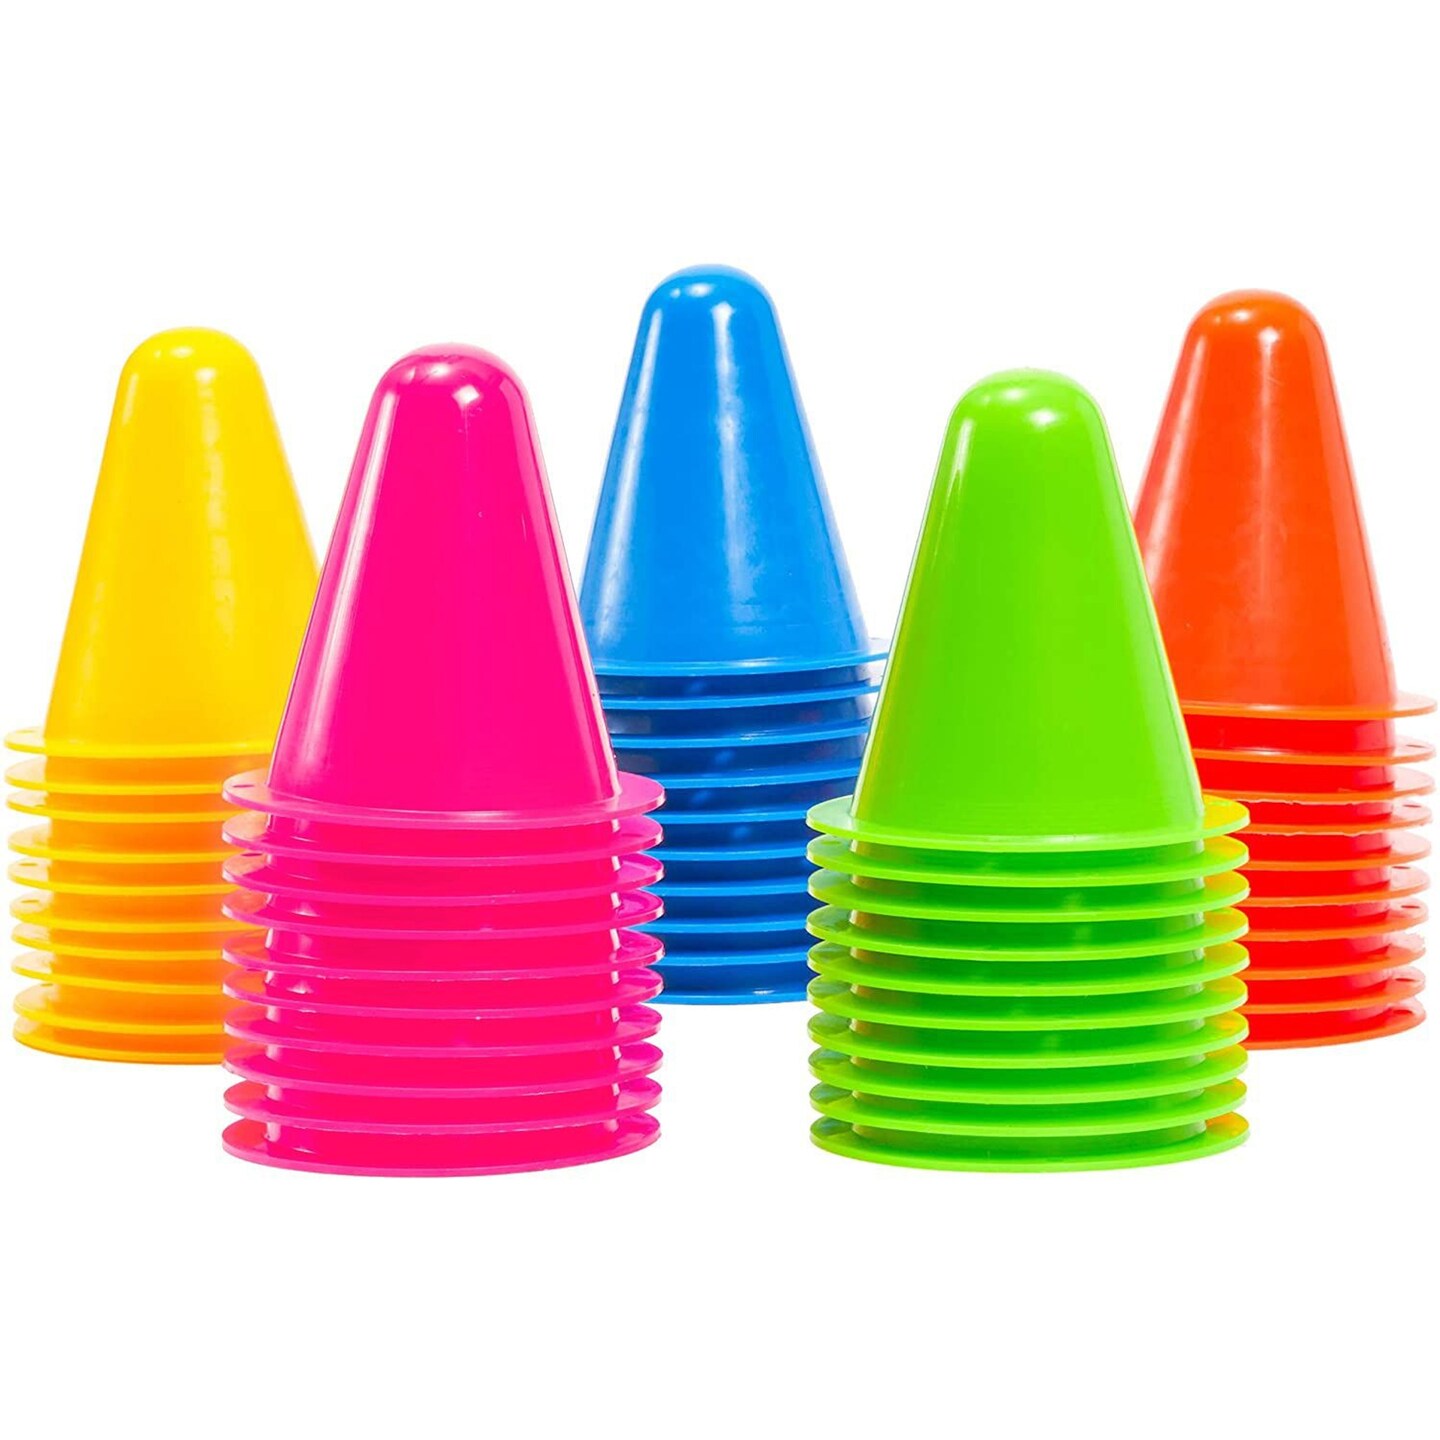 50 Pack Mini Cones for Sports, Kids Indoor, Outdoor Agility Training Cones for Drills, Classroom (Assorted Colors, 3 In)